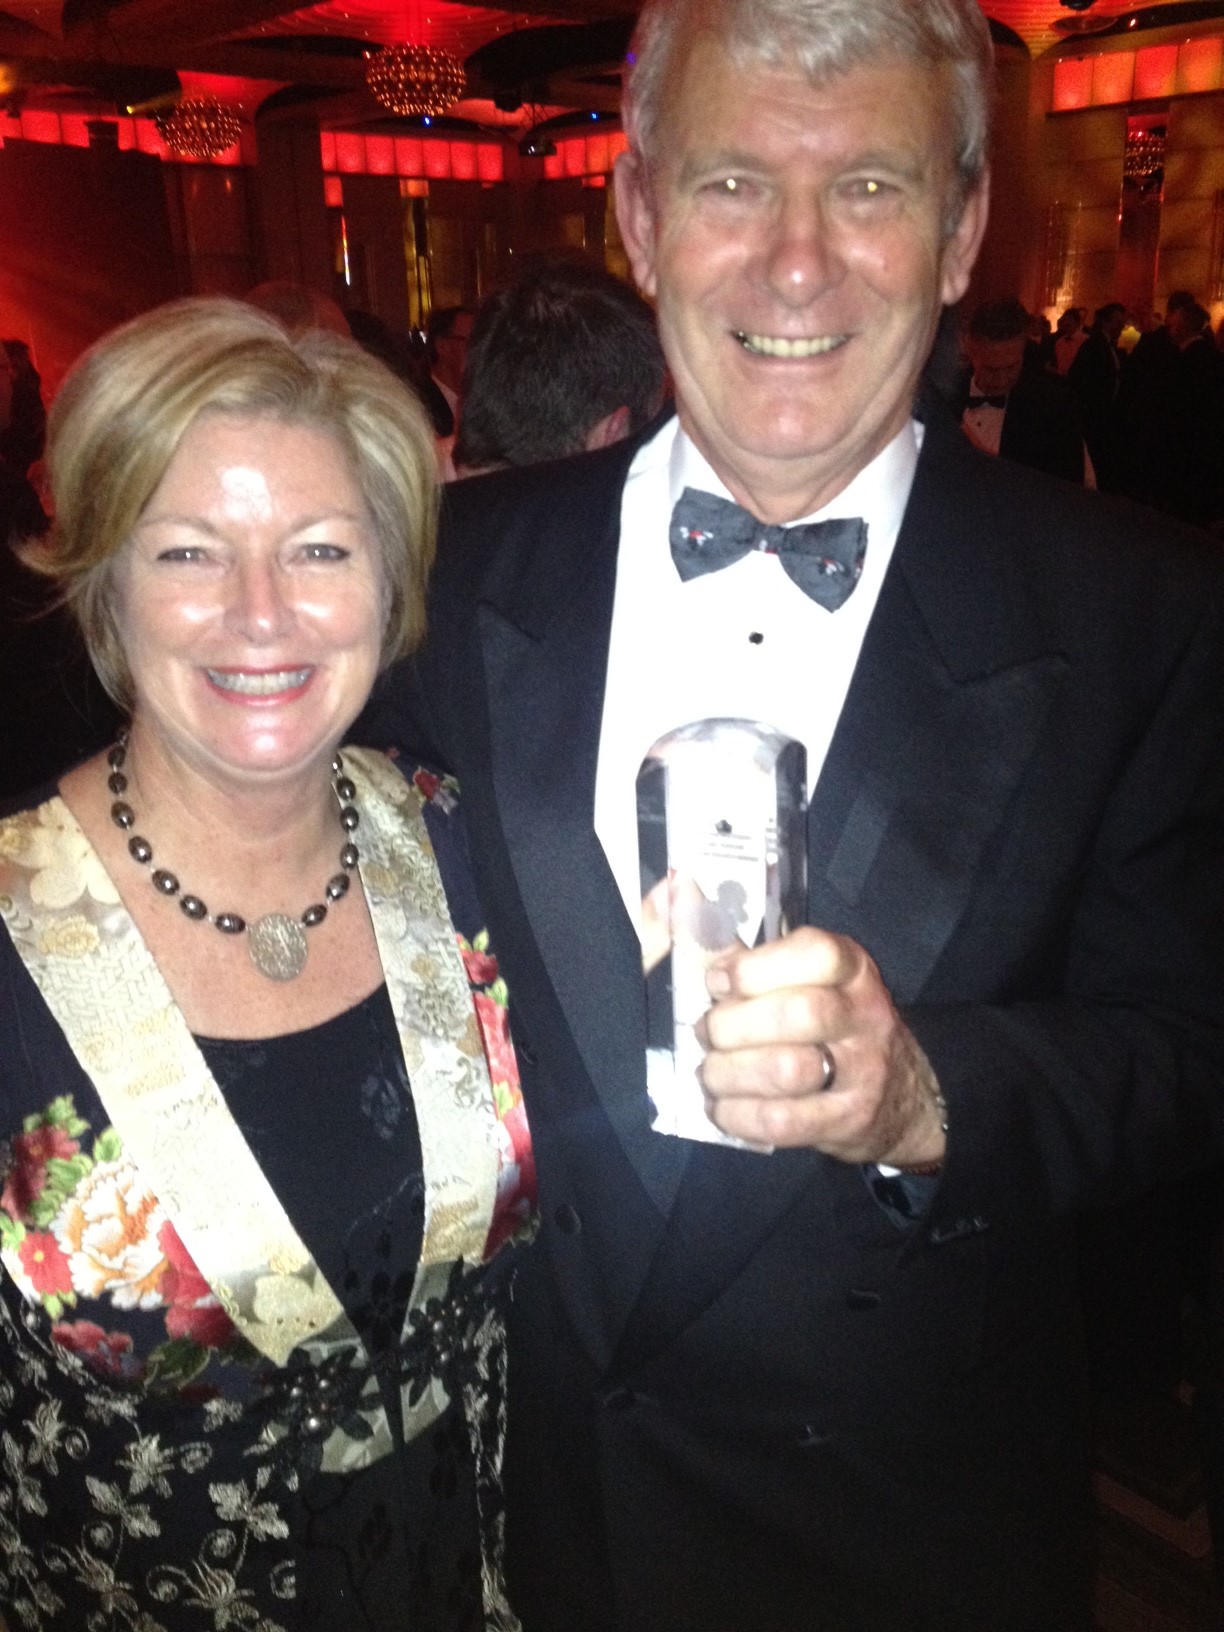 Geoff Bell, Company Chairman, A.W. Bell and his wife Yvonne Bell at the Hall of Fame Gala event